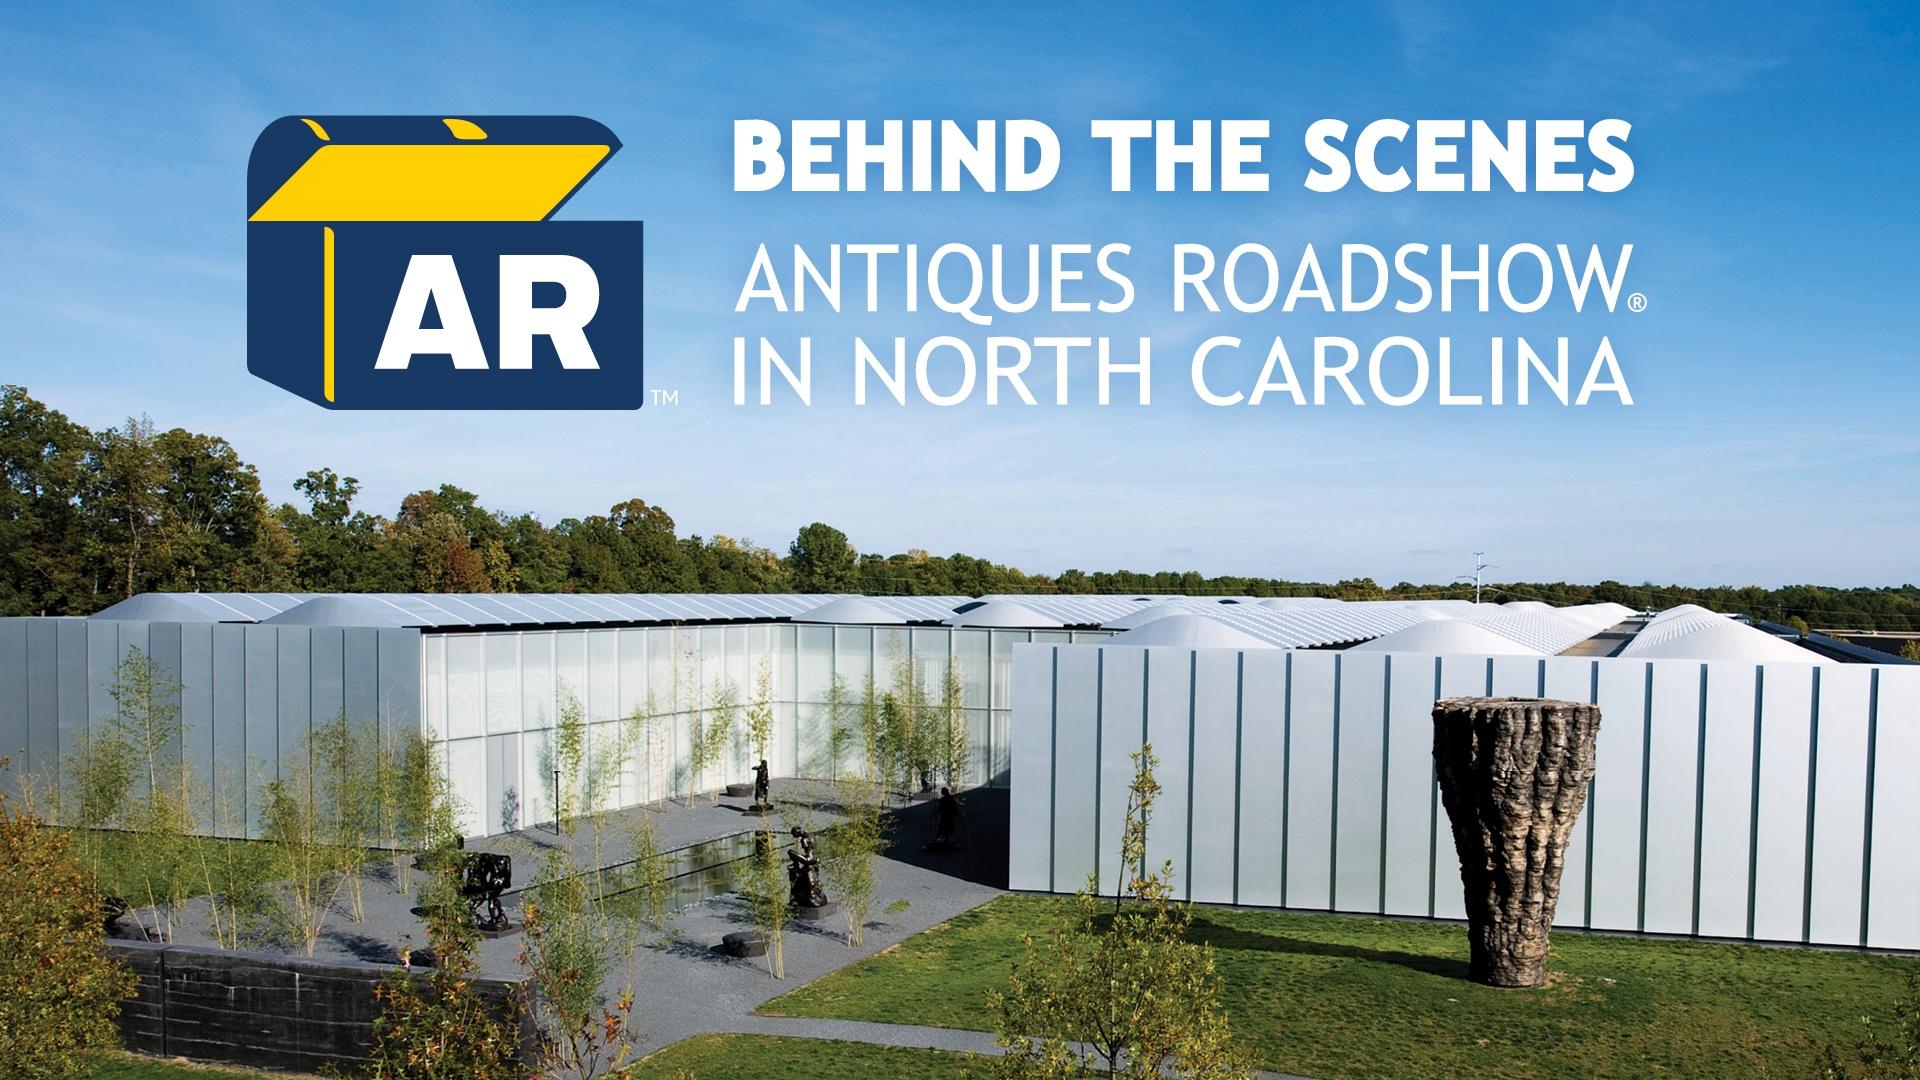 Behind the Scenes: Antiques Roadshow in North Carolina